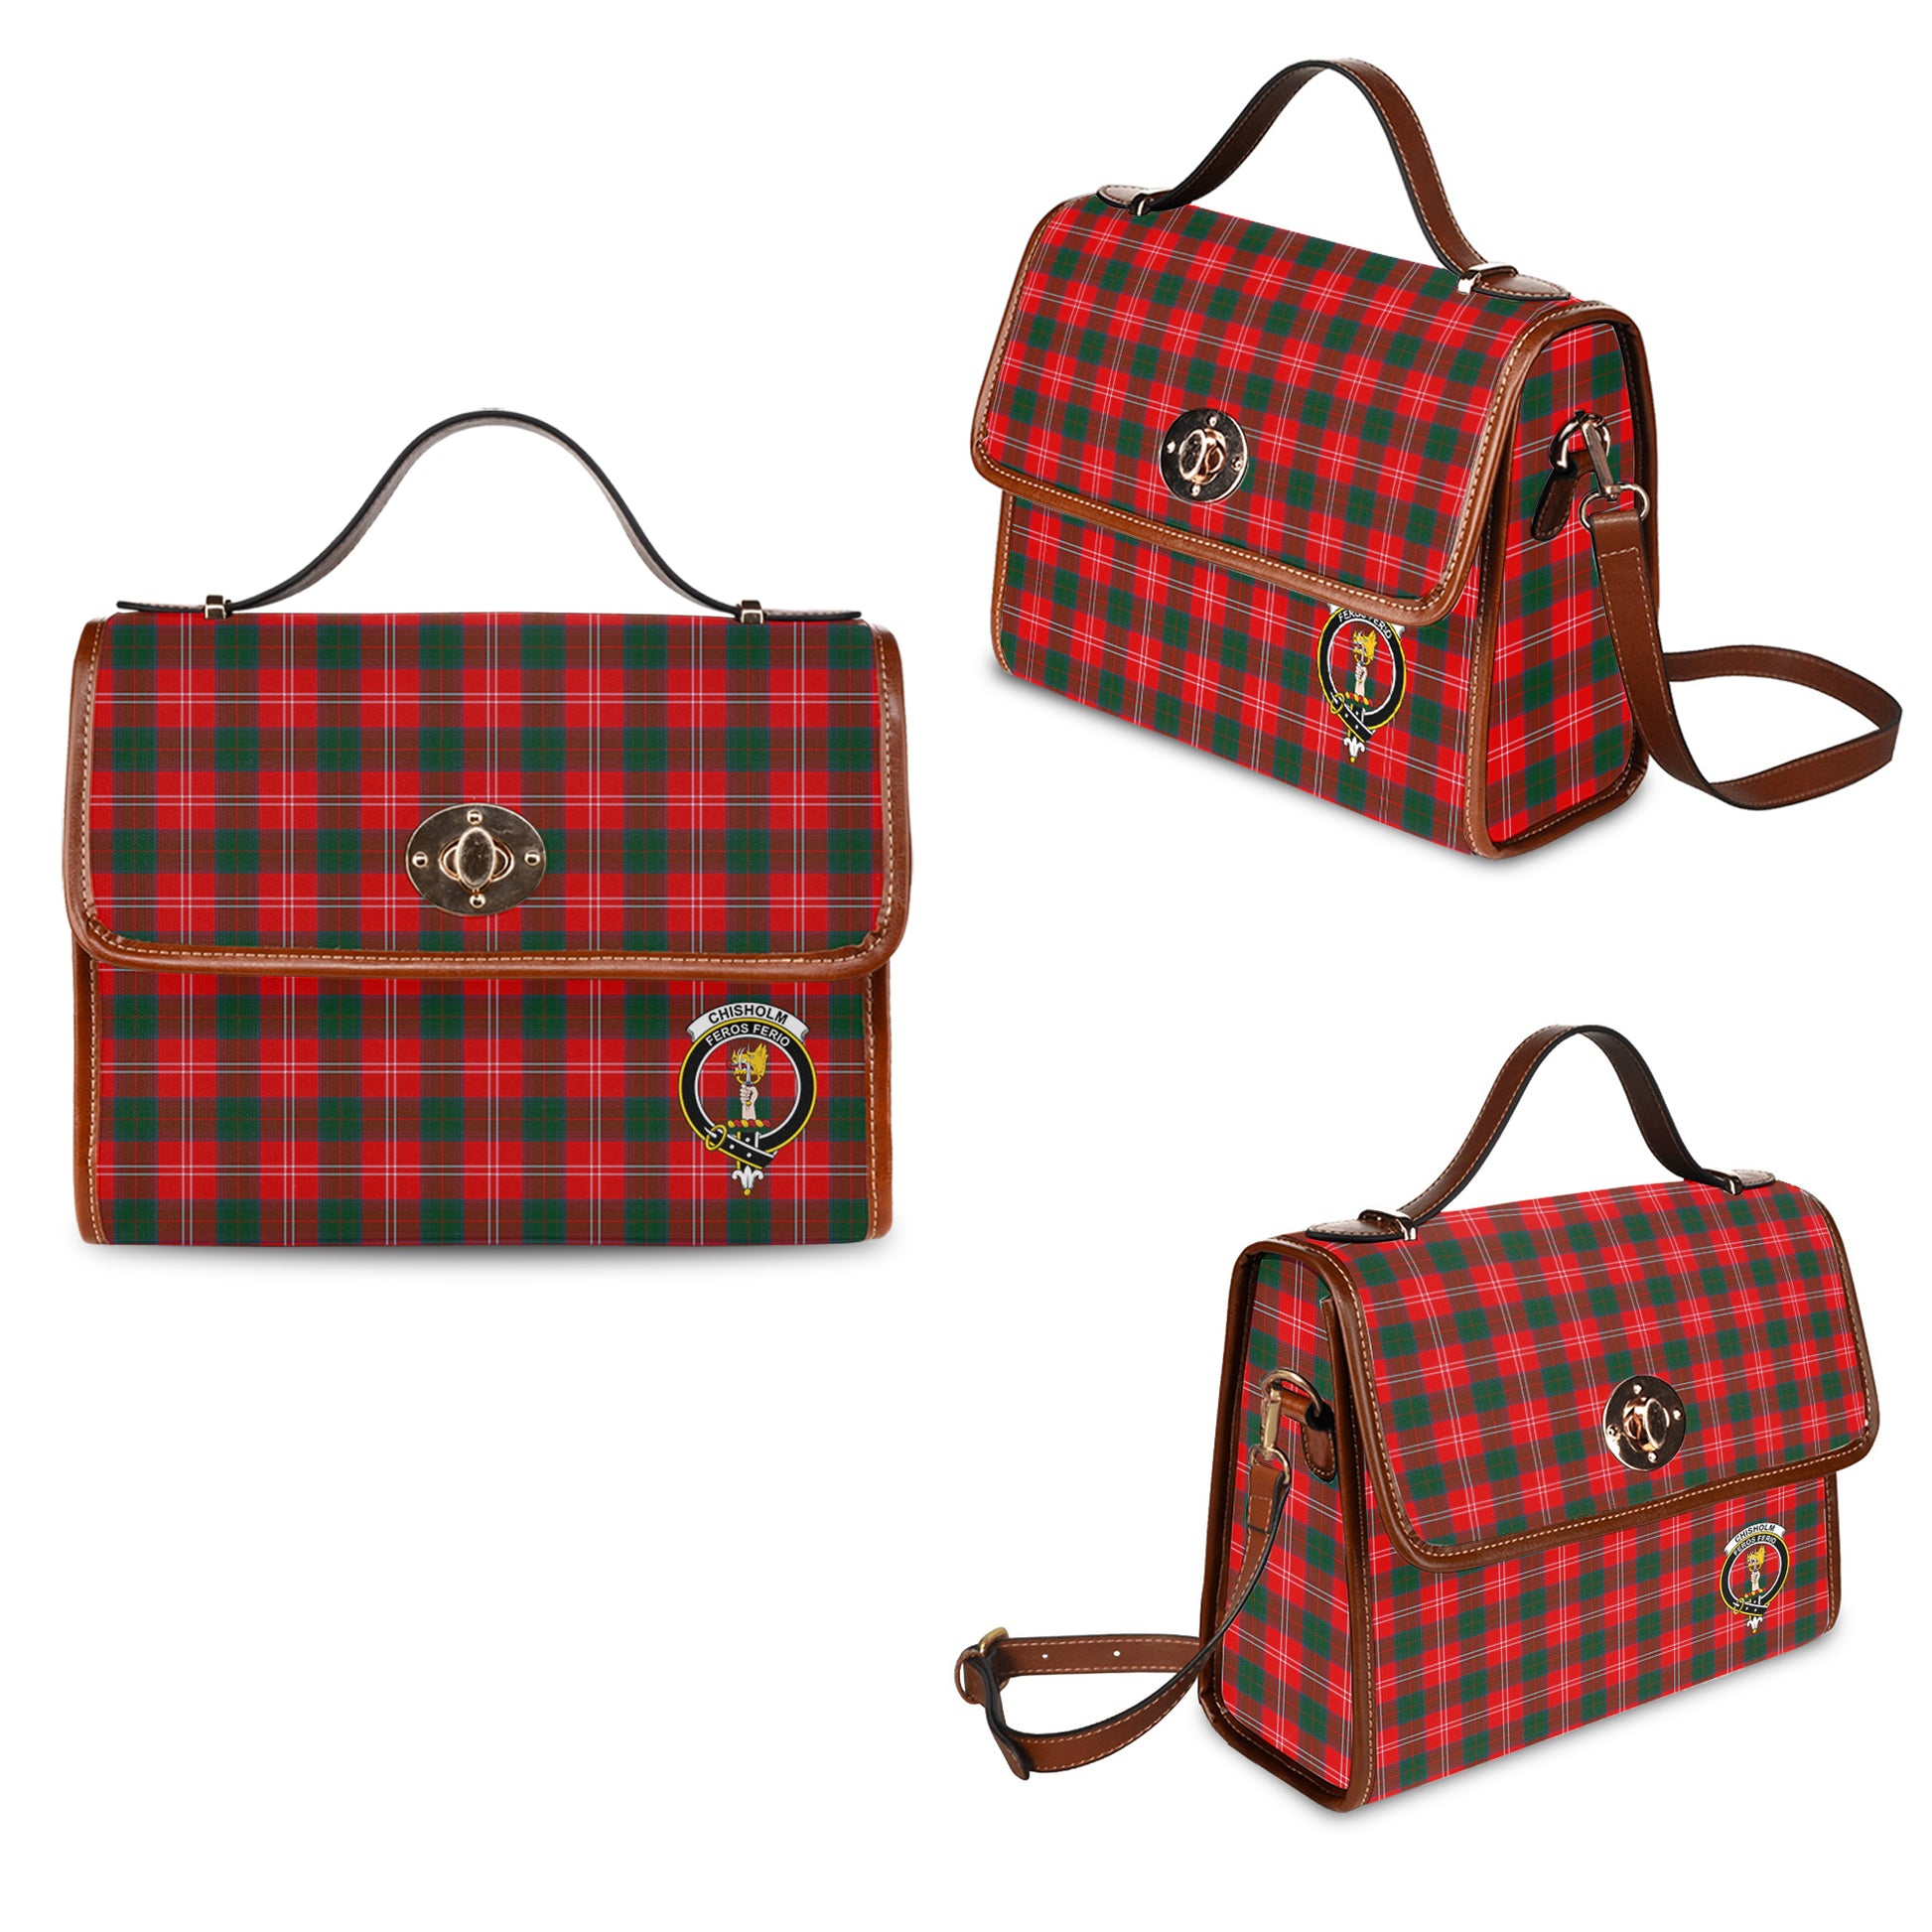 chisholm-modern-tartan-leather-strap-waterproof-canvas-bag-with-family-crest